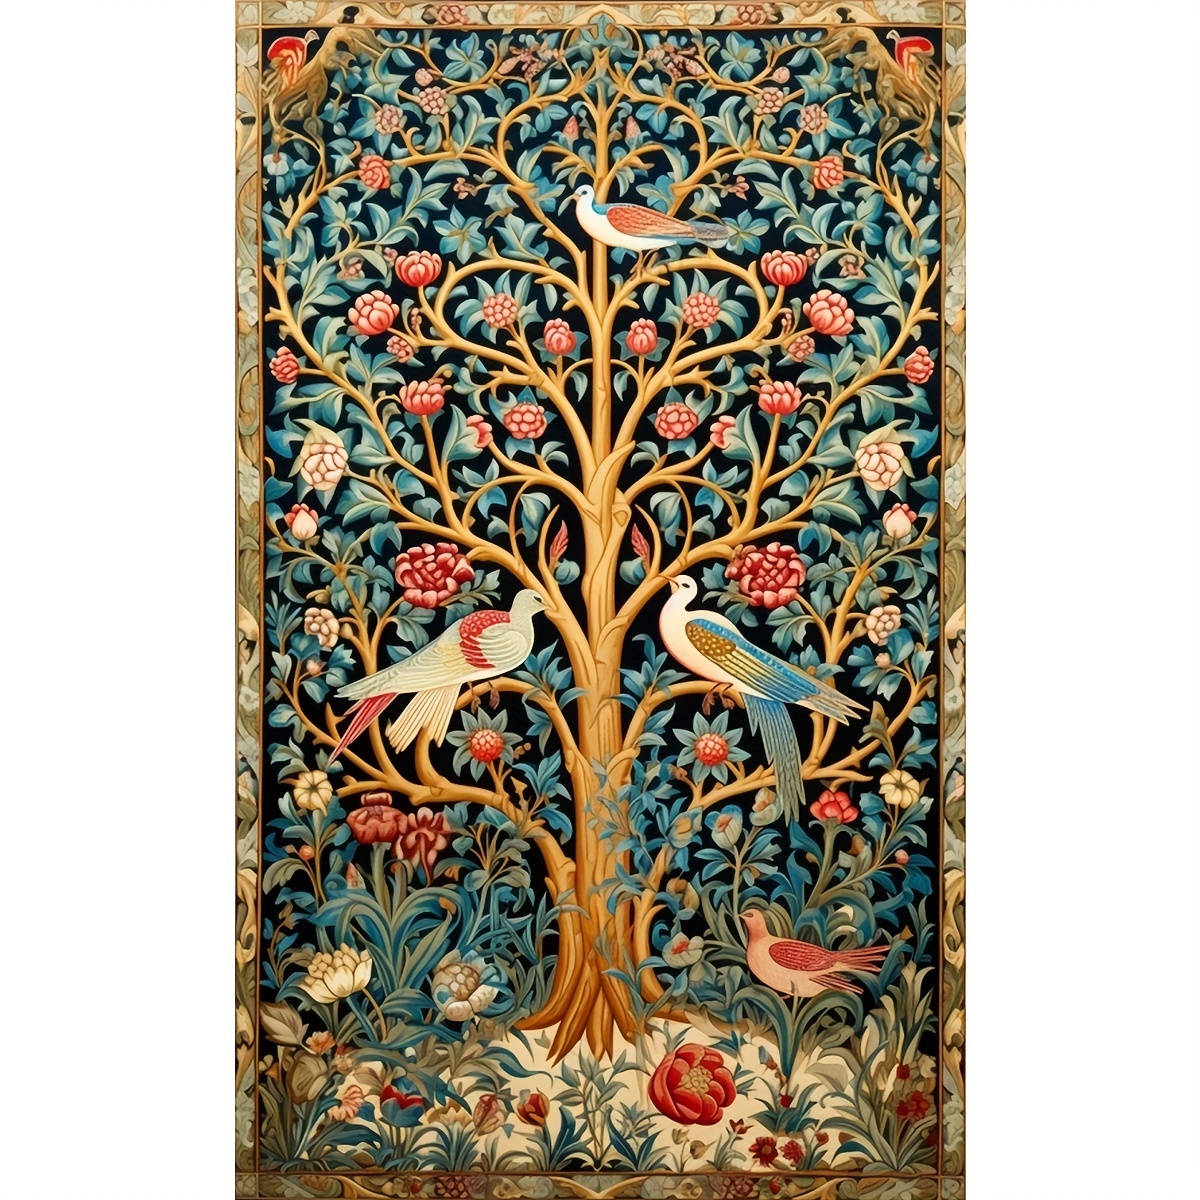 

Tree Of Life & Animals Cross Stitch Kit - Complete Embroidery Set For Living Room & Bedroom Decor, Includes Pattern, Fabric, Thread, Needle & Instructions, 15.7x27.6 Inches